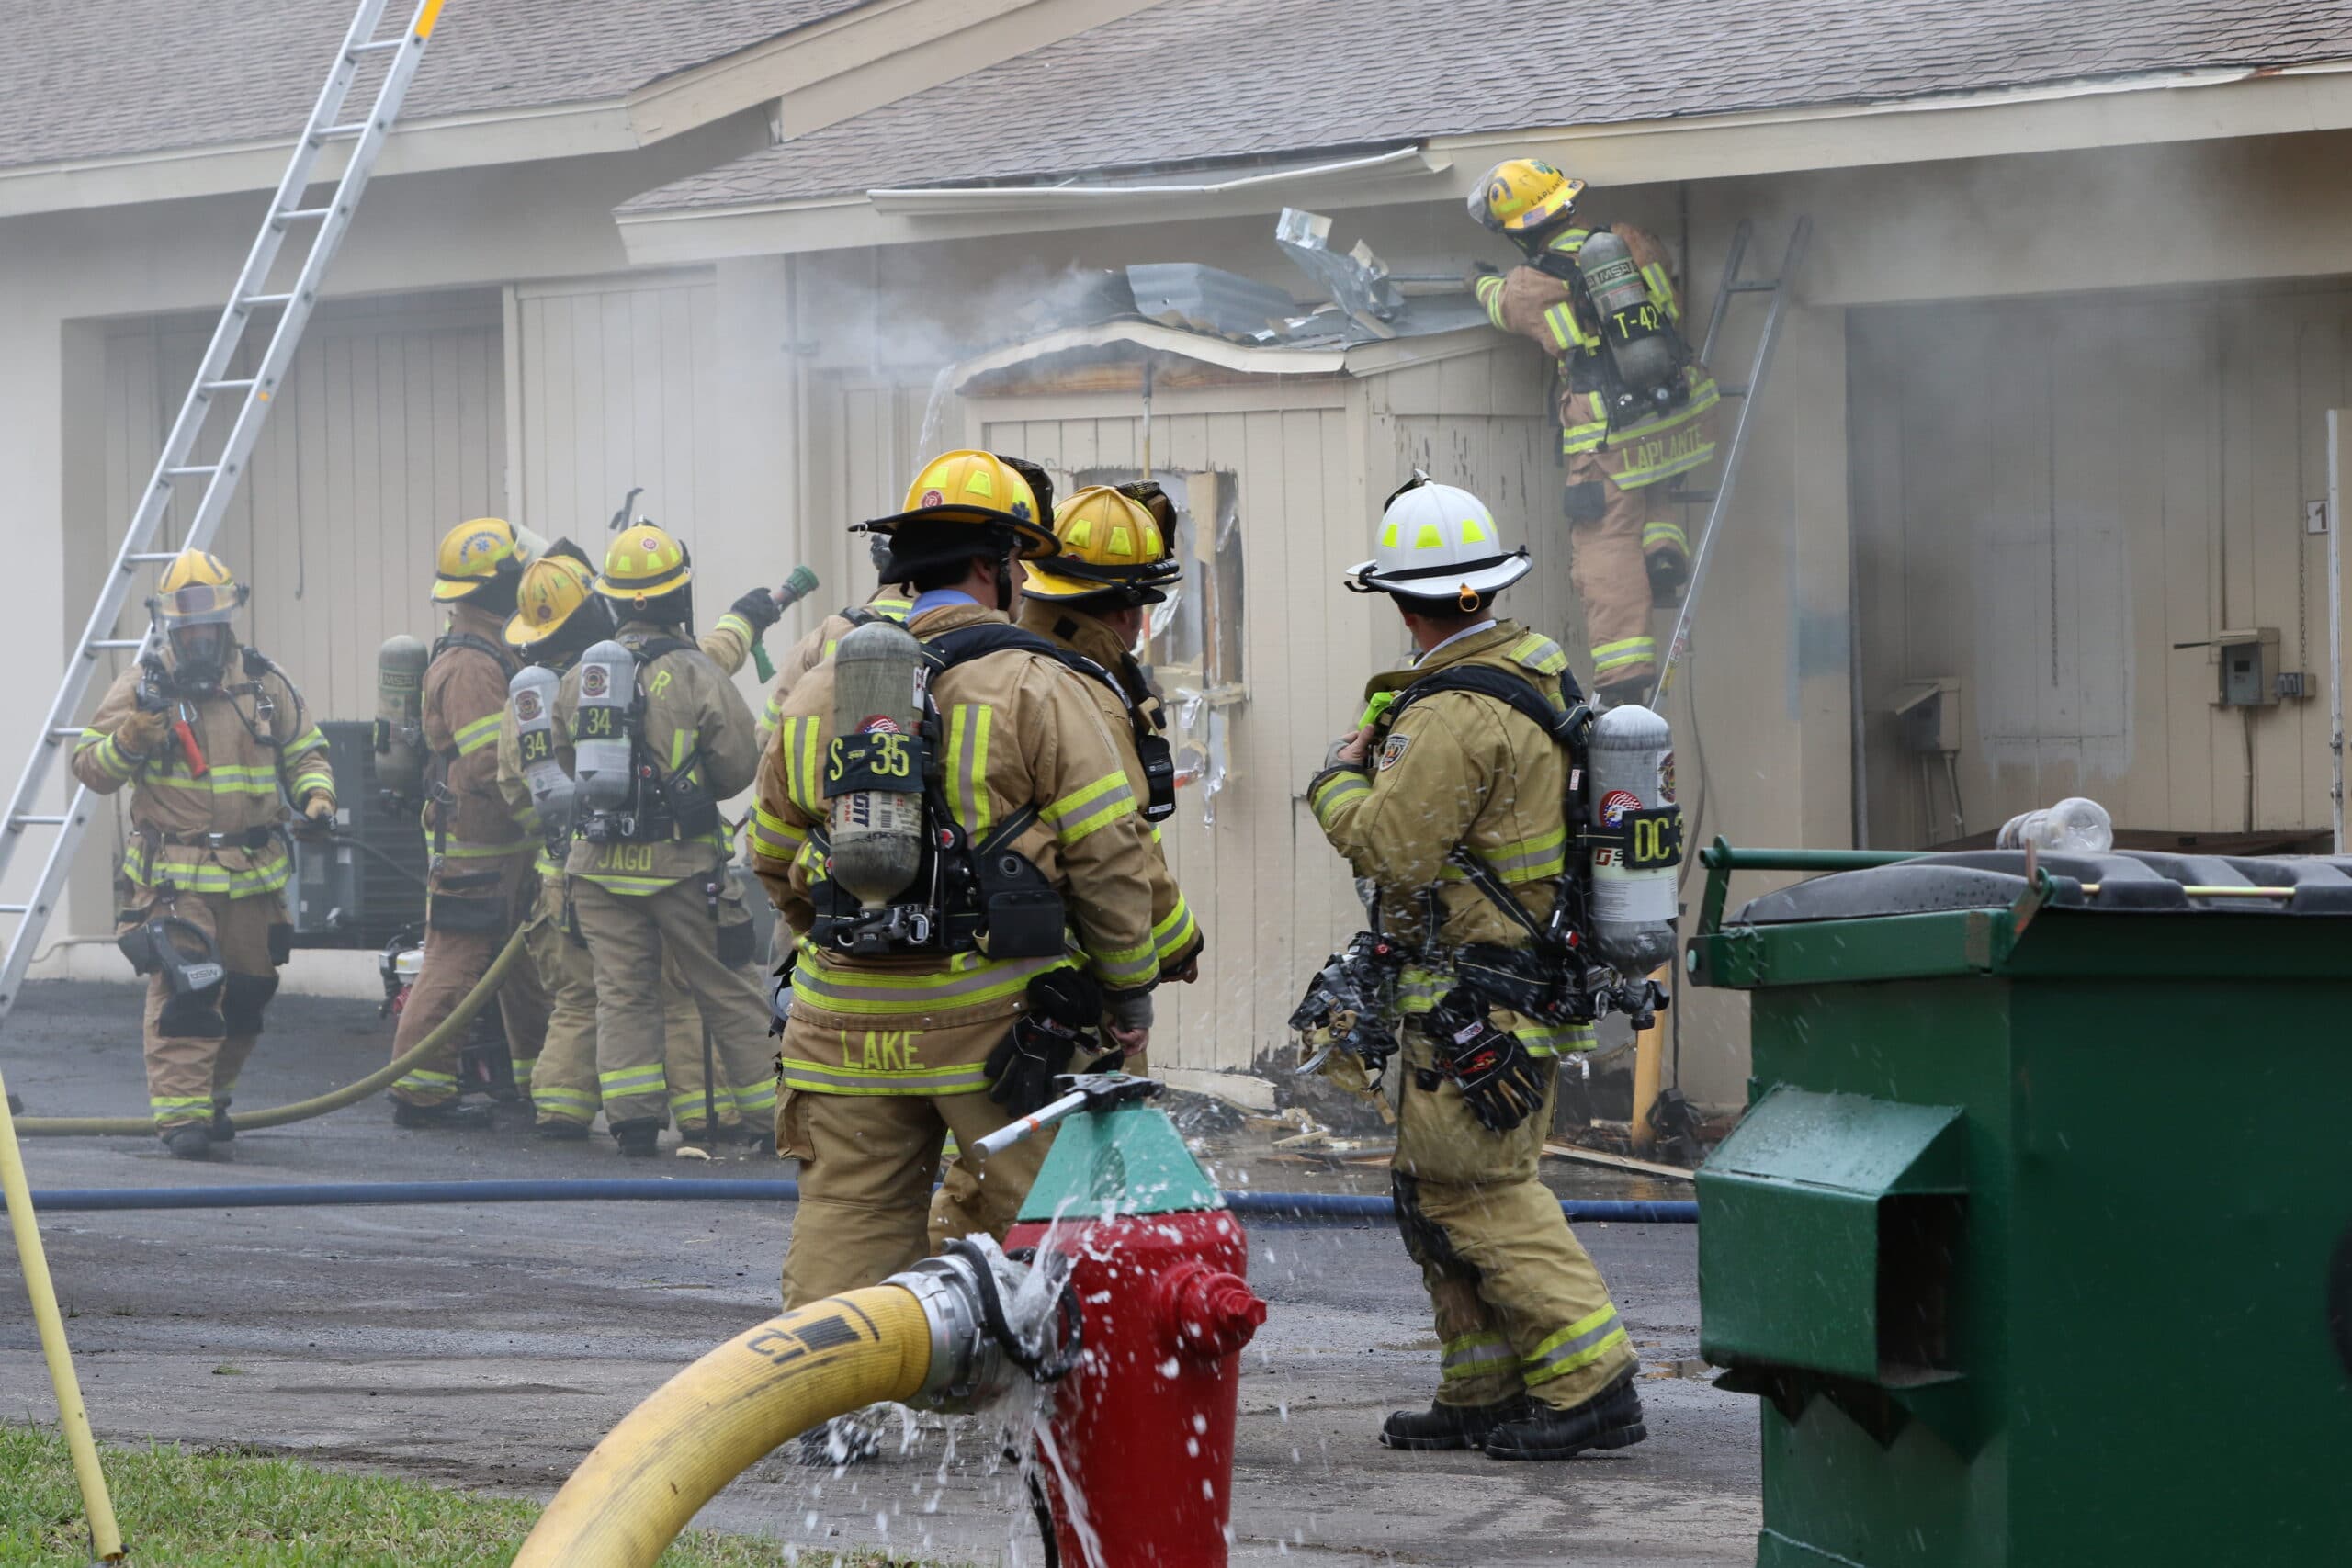 Structure Fire In Pinellas Park This Morning at 66th St and Bryan Dairy Road[VIDEO]